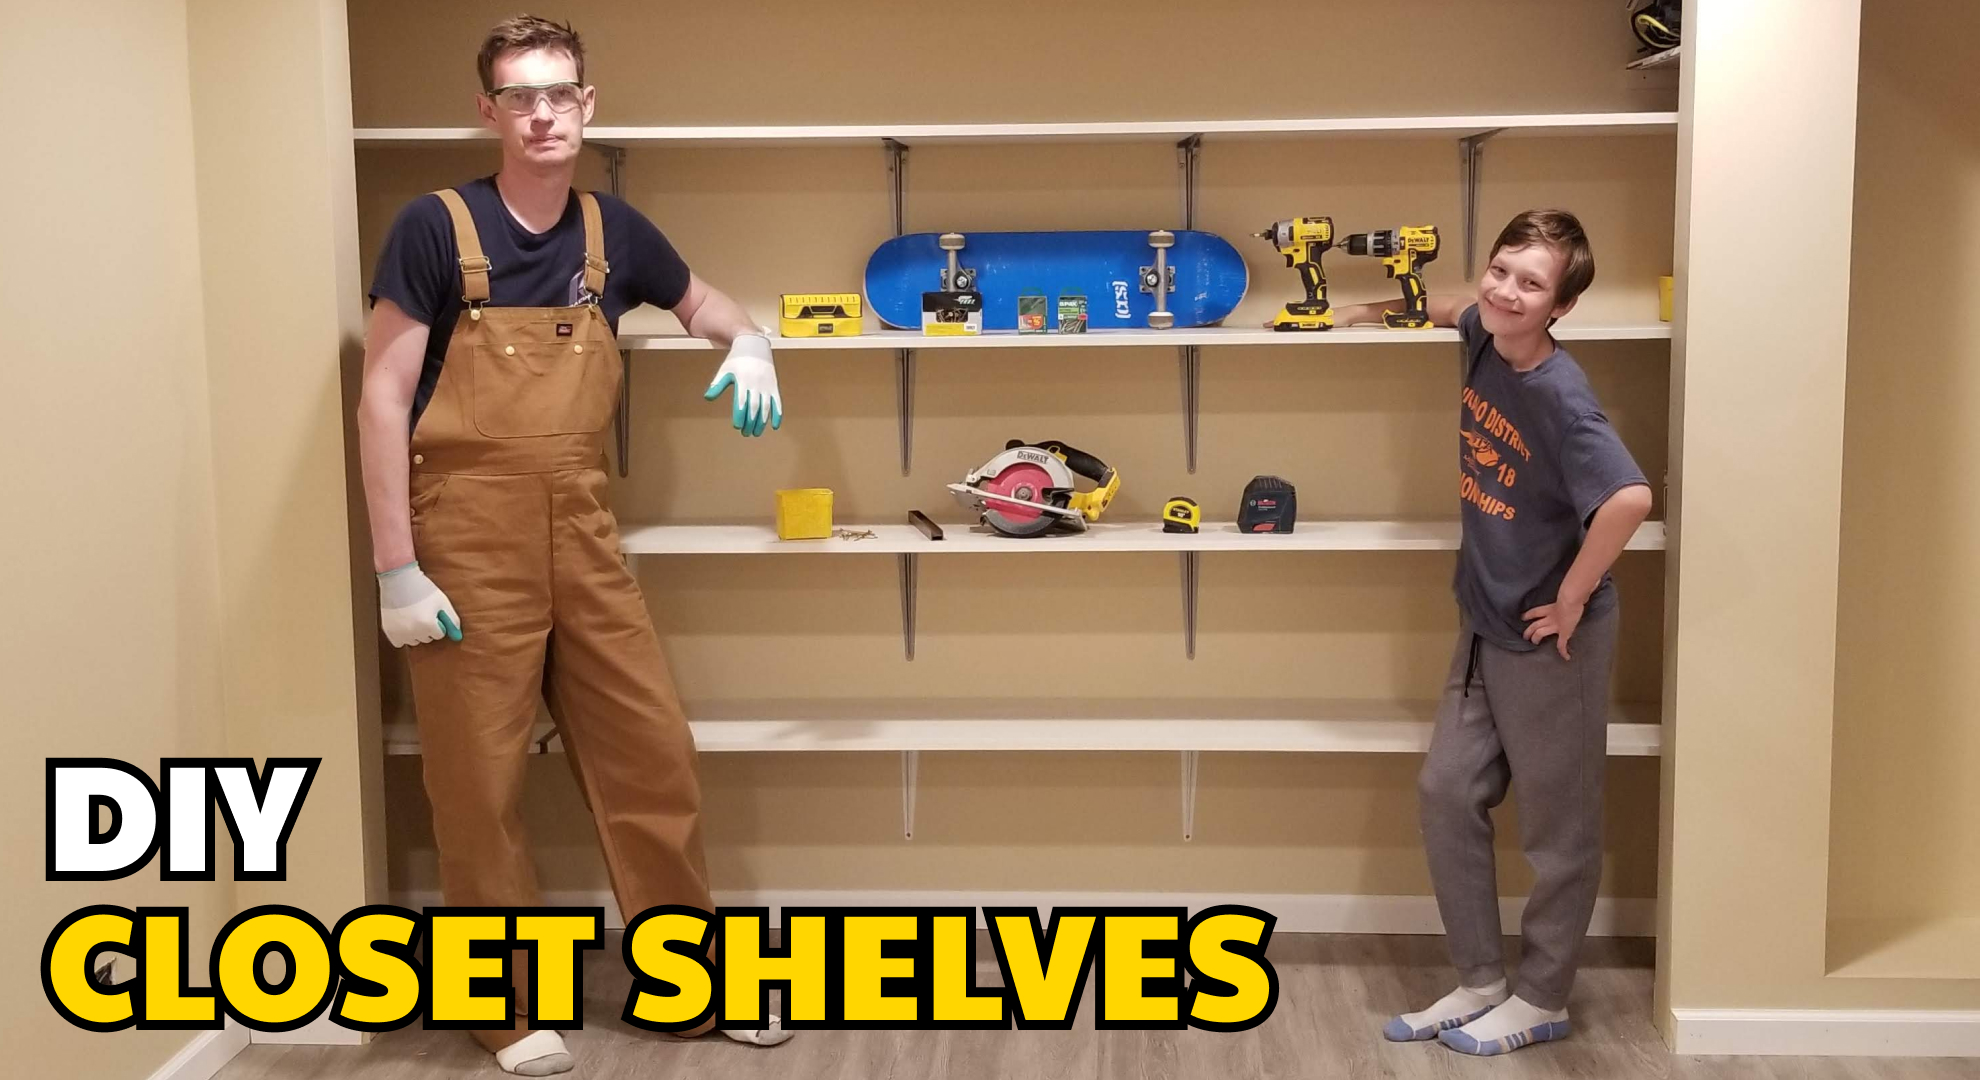 I and my son are showing step by step video how to build shelves for closet. You can do this for bedroom closet or kitchen pantry.